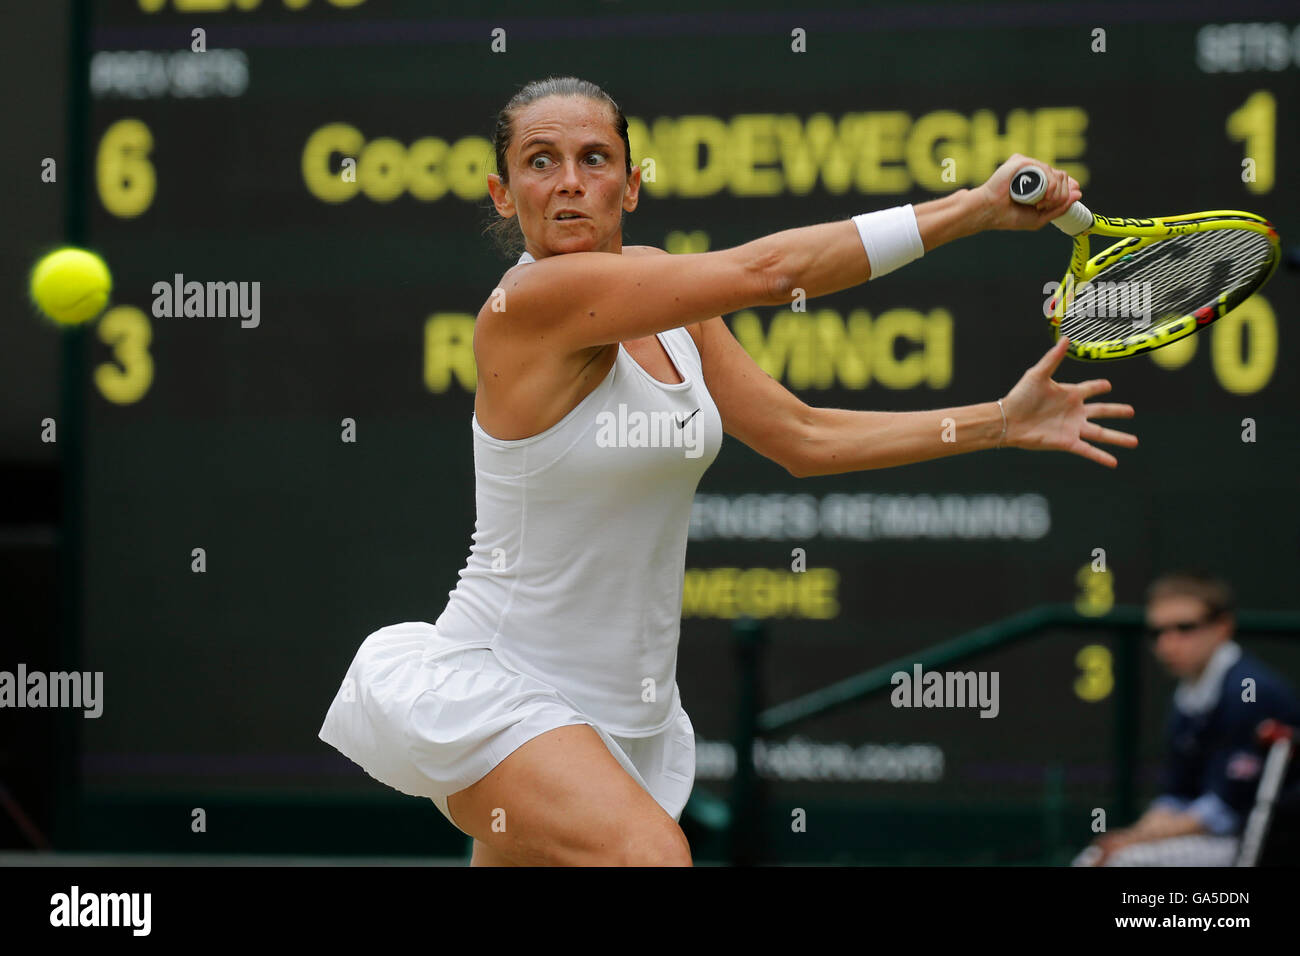 Wimbledon, London, UK. 3rd July, 2016. Roberta Vinci Italy The Wimbledon Championships 2016 The All England Tennis Club, Wimbledon, London, England 03 July 2016 The All England Tennis Club, Wimbledon, London, England 2016 © Allstar Picture Library/Alamy Live News Credit:  Allstar Picture Library/Alamy Live News Stock Photo